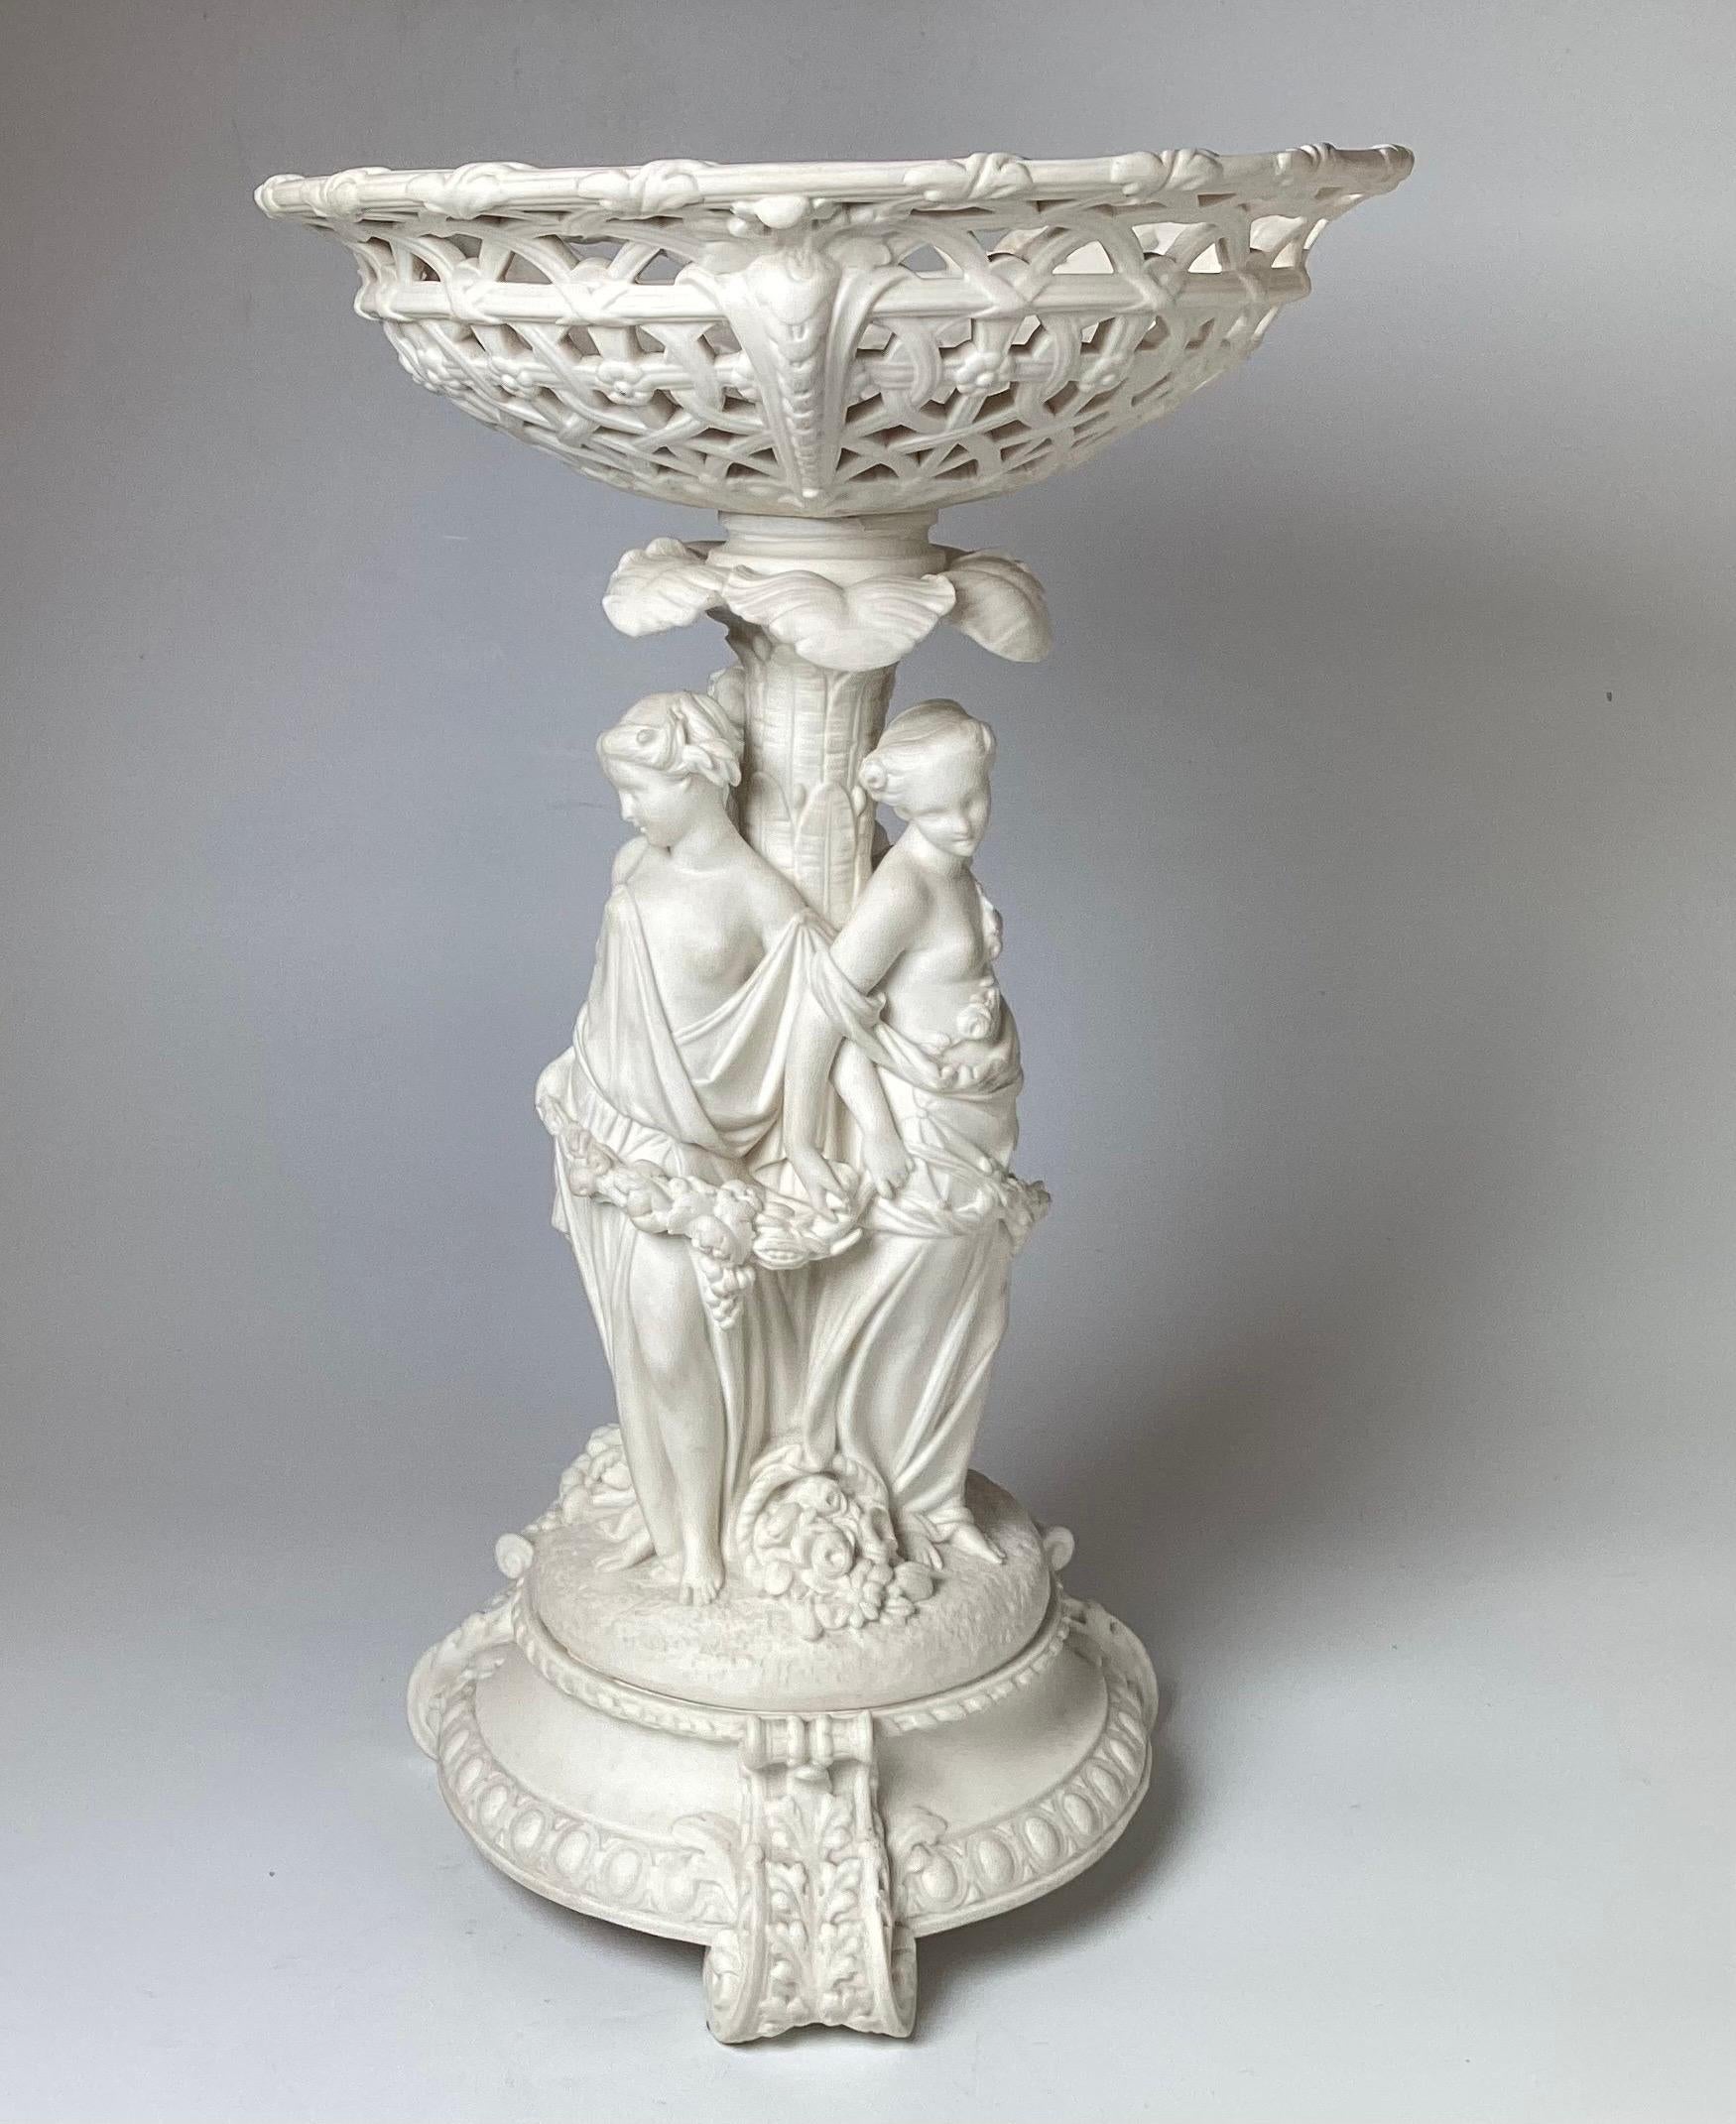 A Large English Parian Porcelain Figural Centerpiece Bowl In Good Condition For Sale In Lambertville, NJ